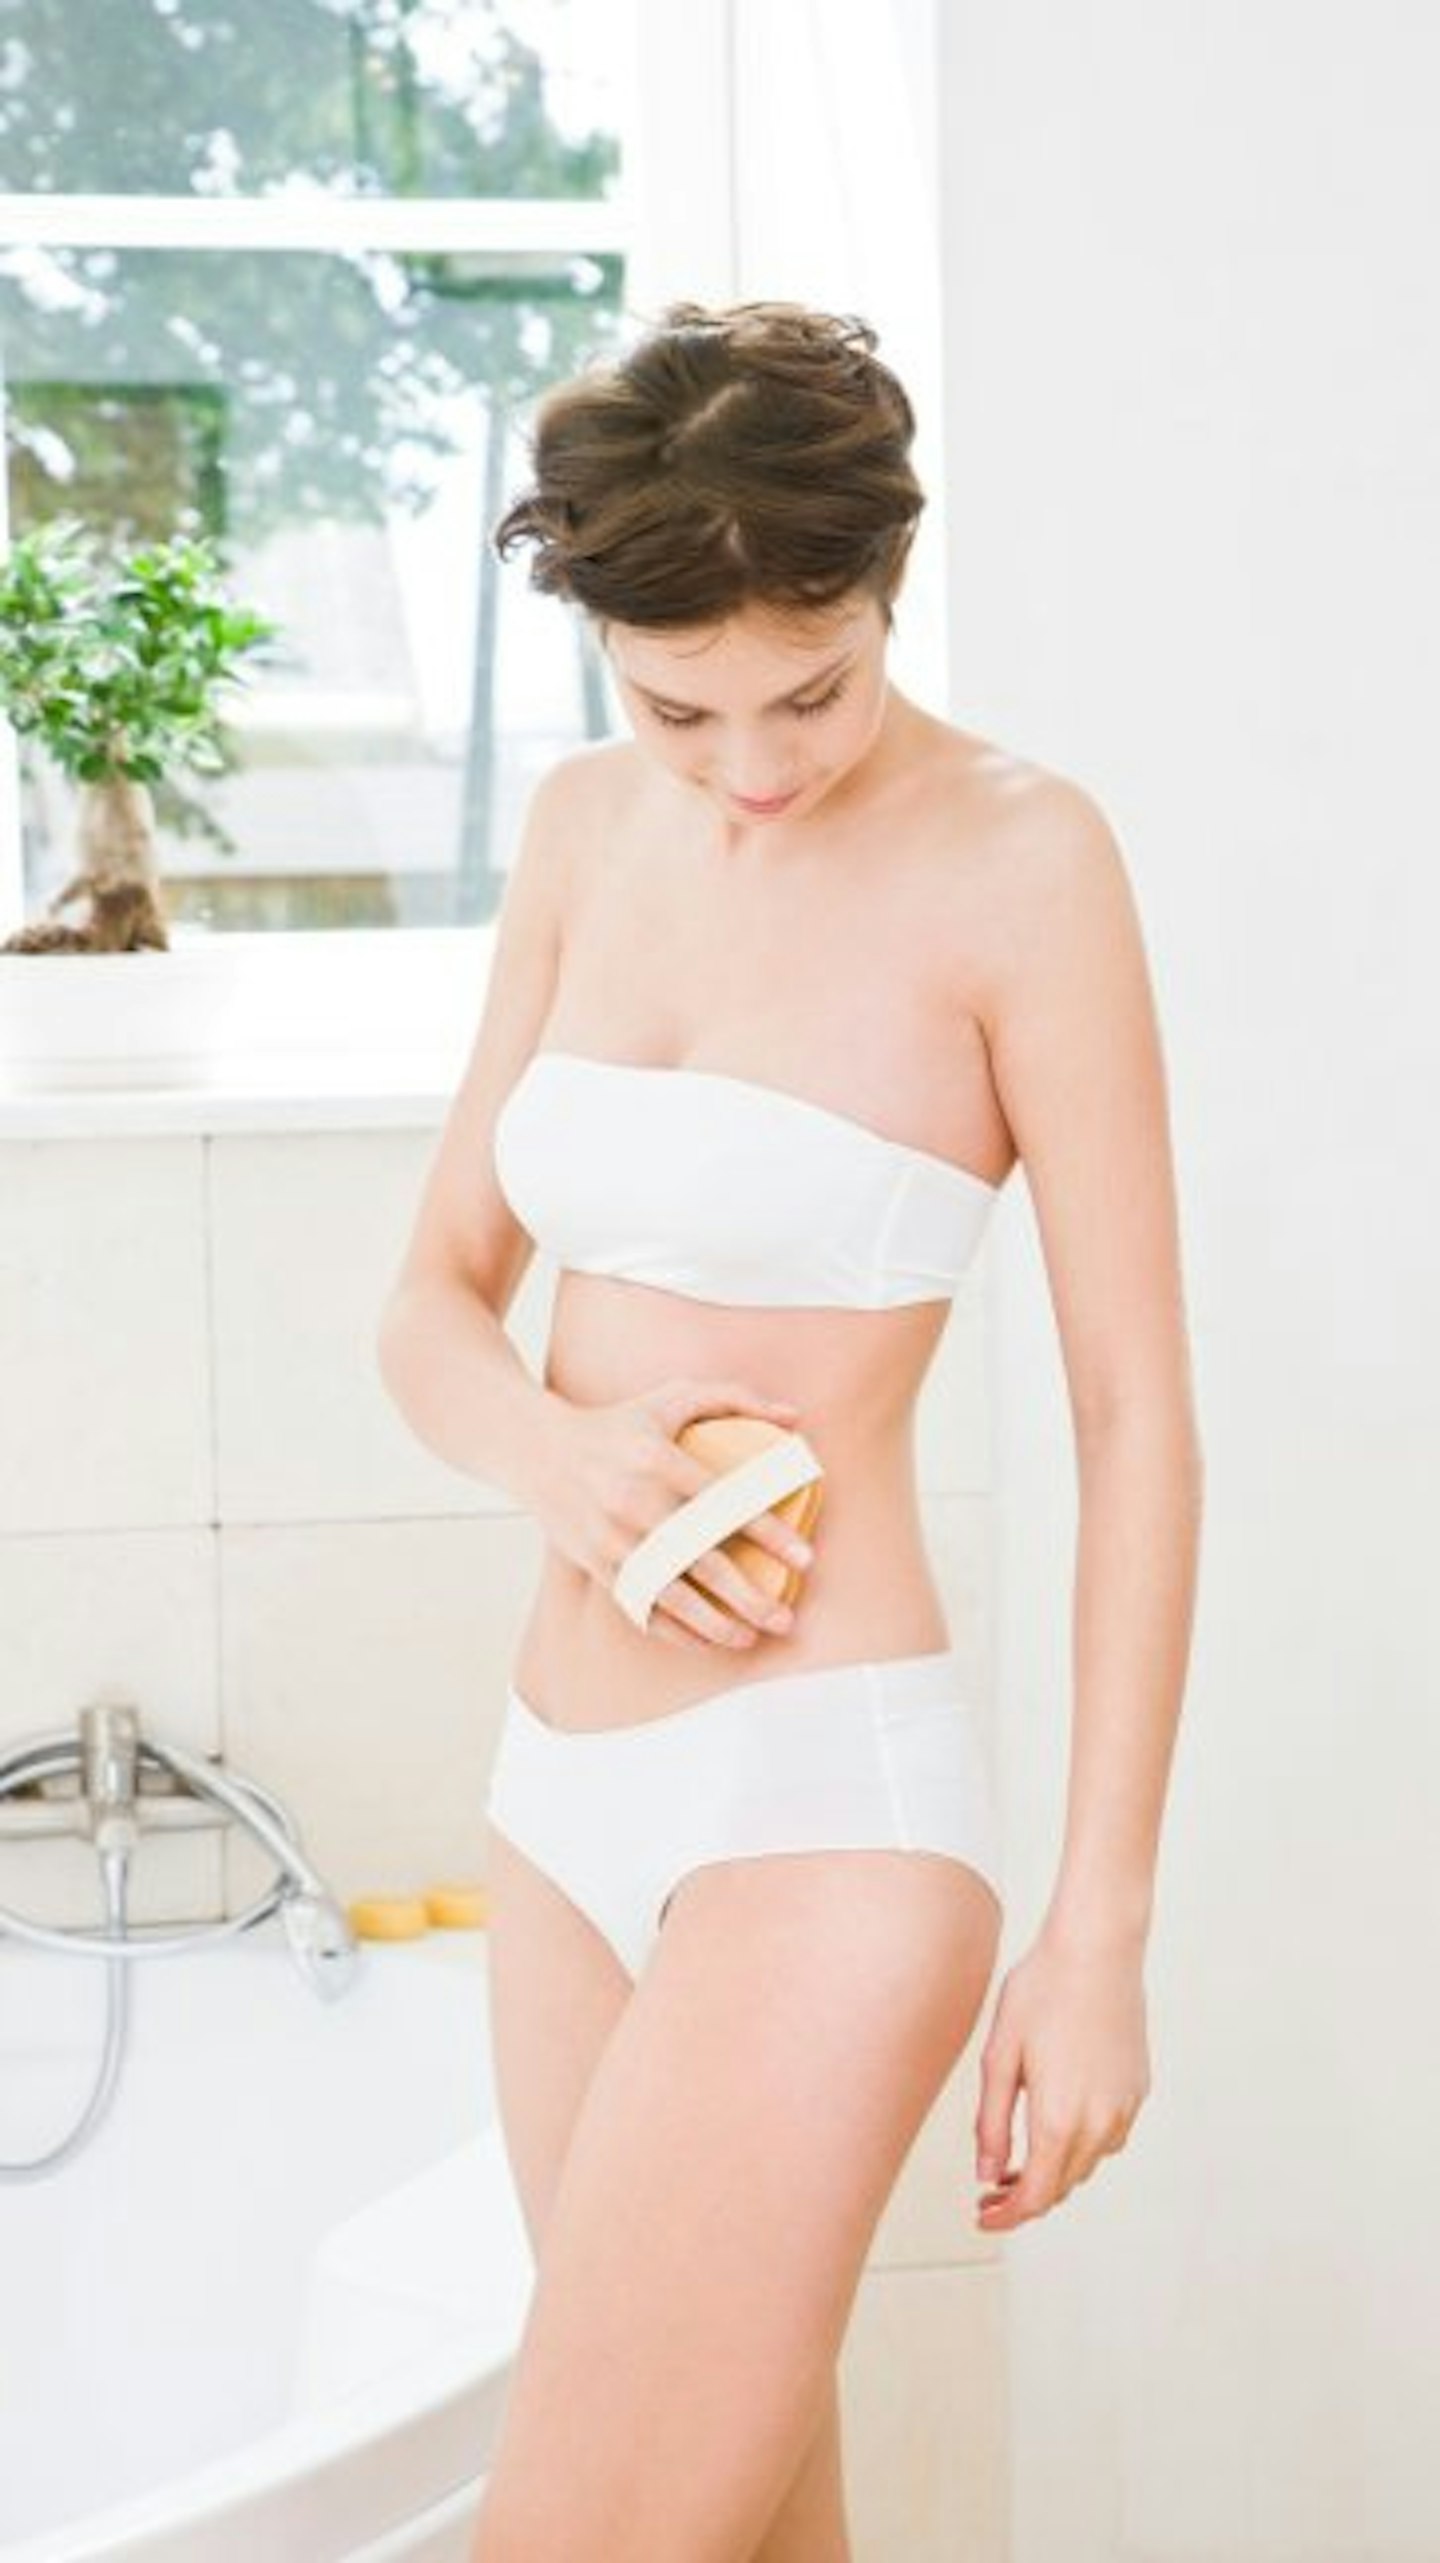 A body brush is a great way to improve the appearance of cellulite